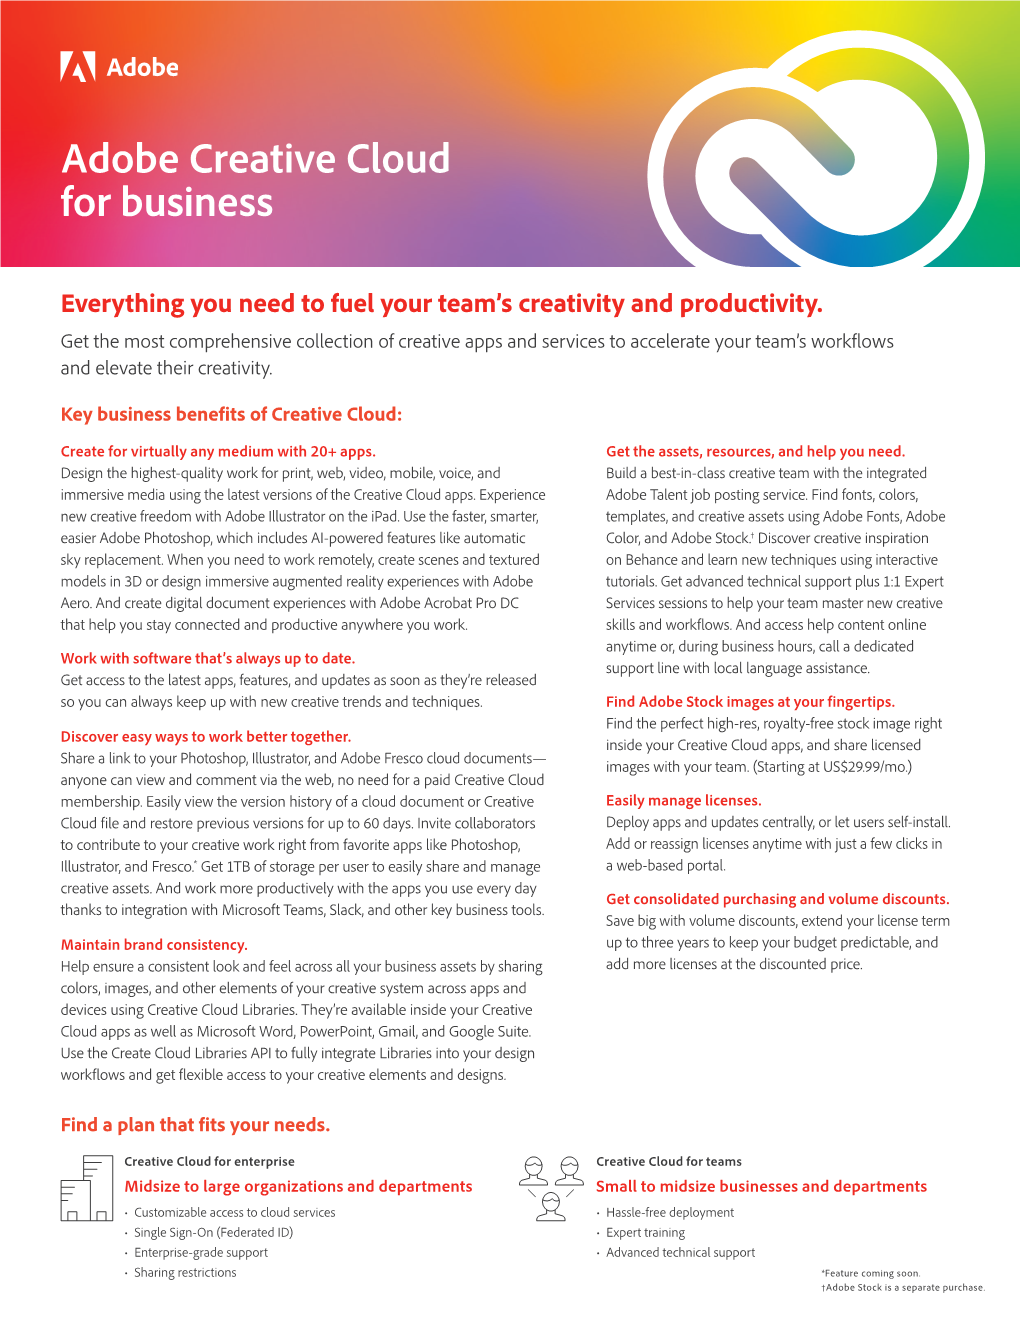 Adobe Creative Cloud for Business